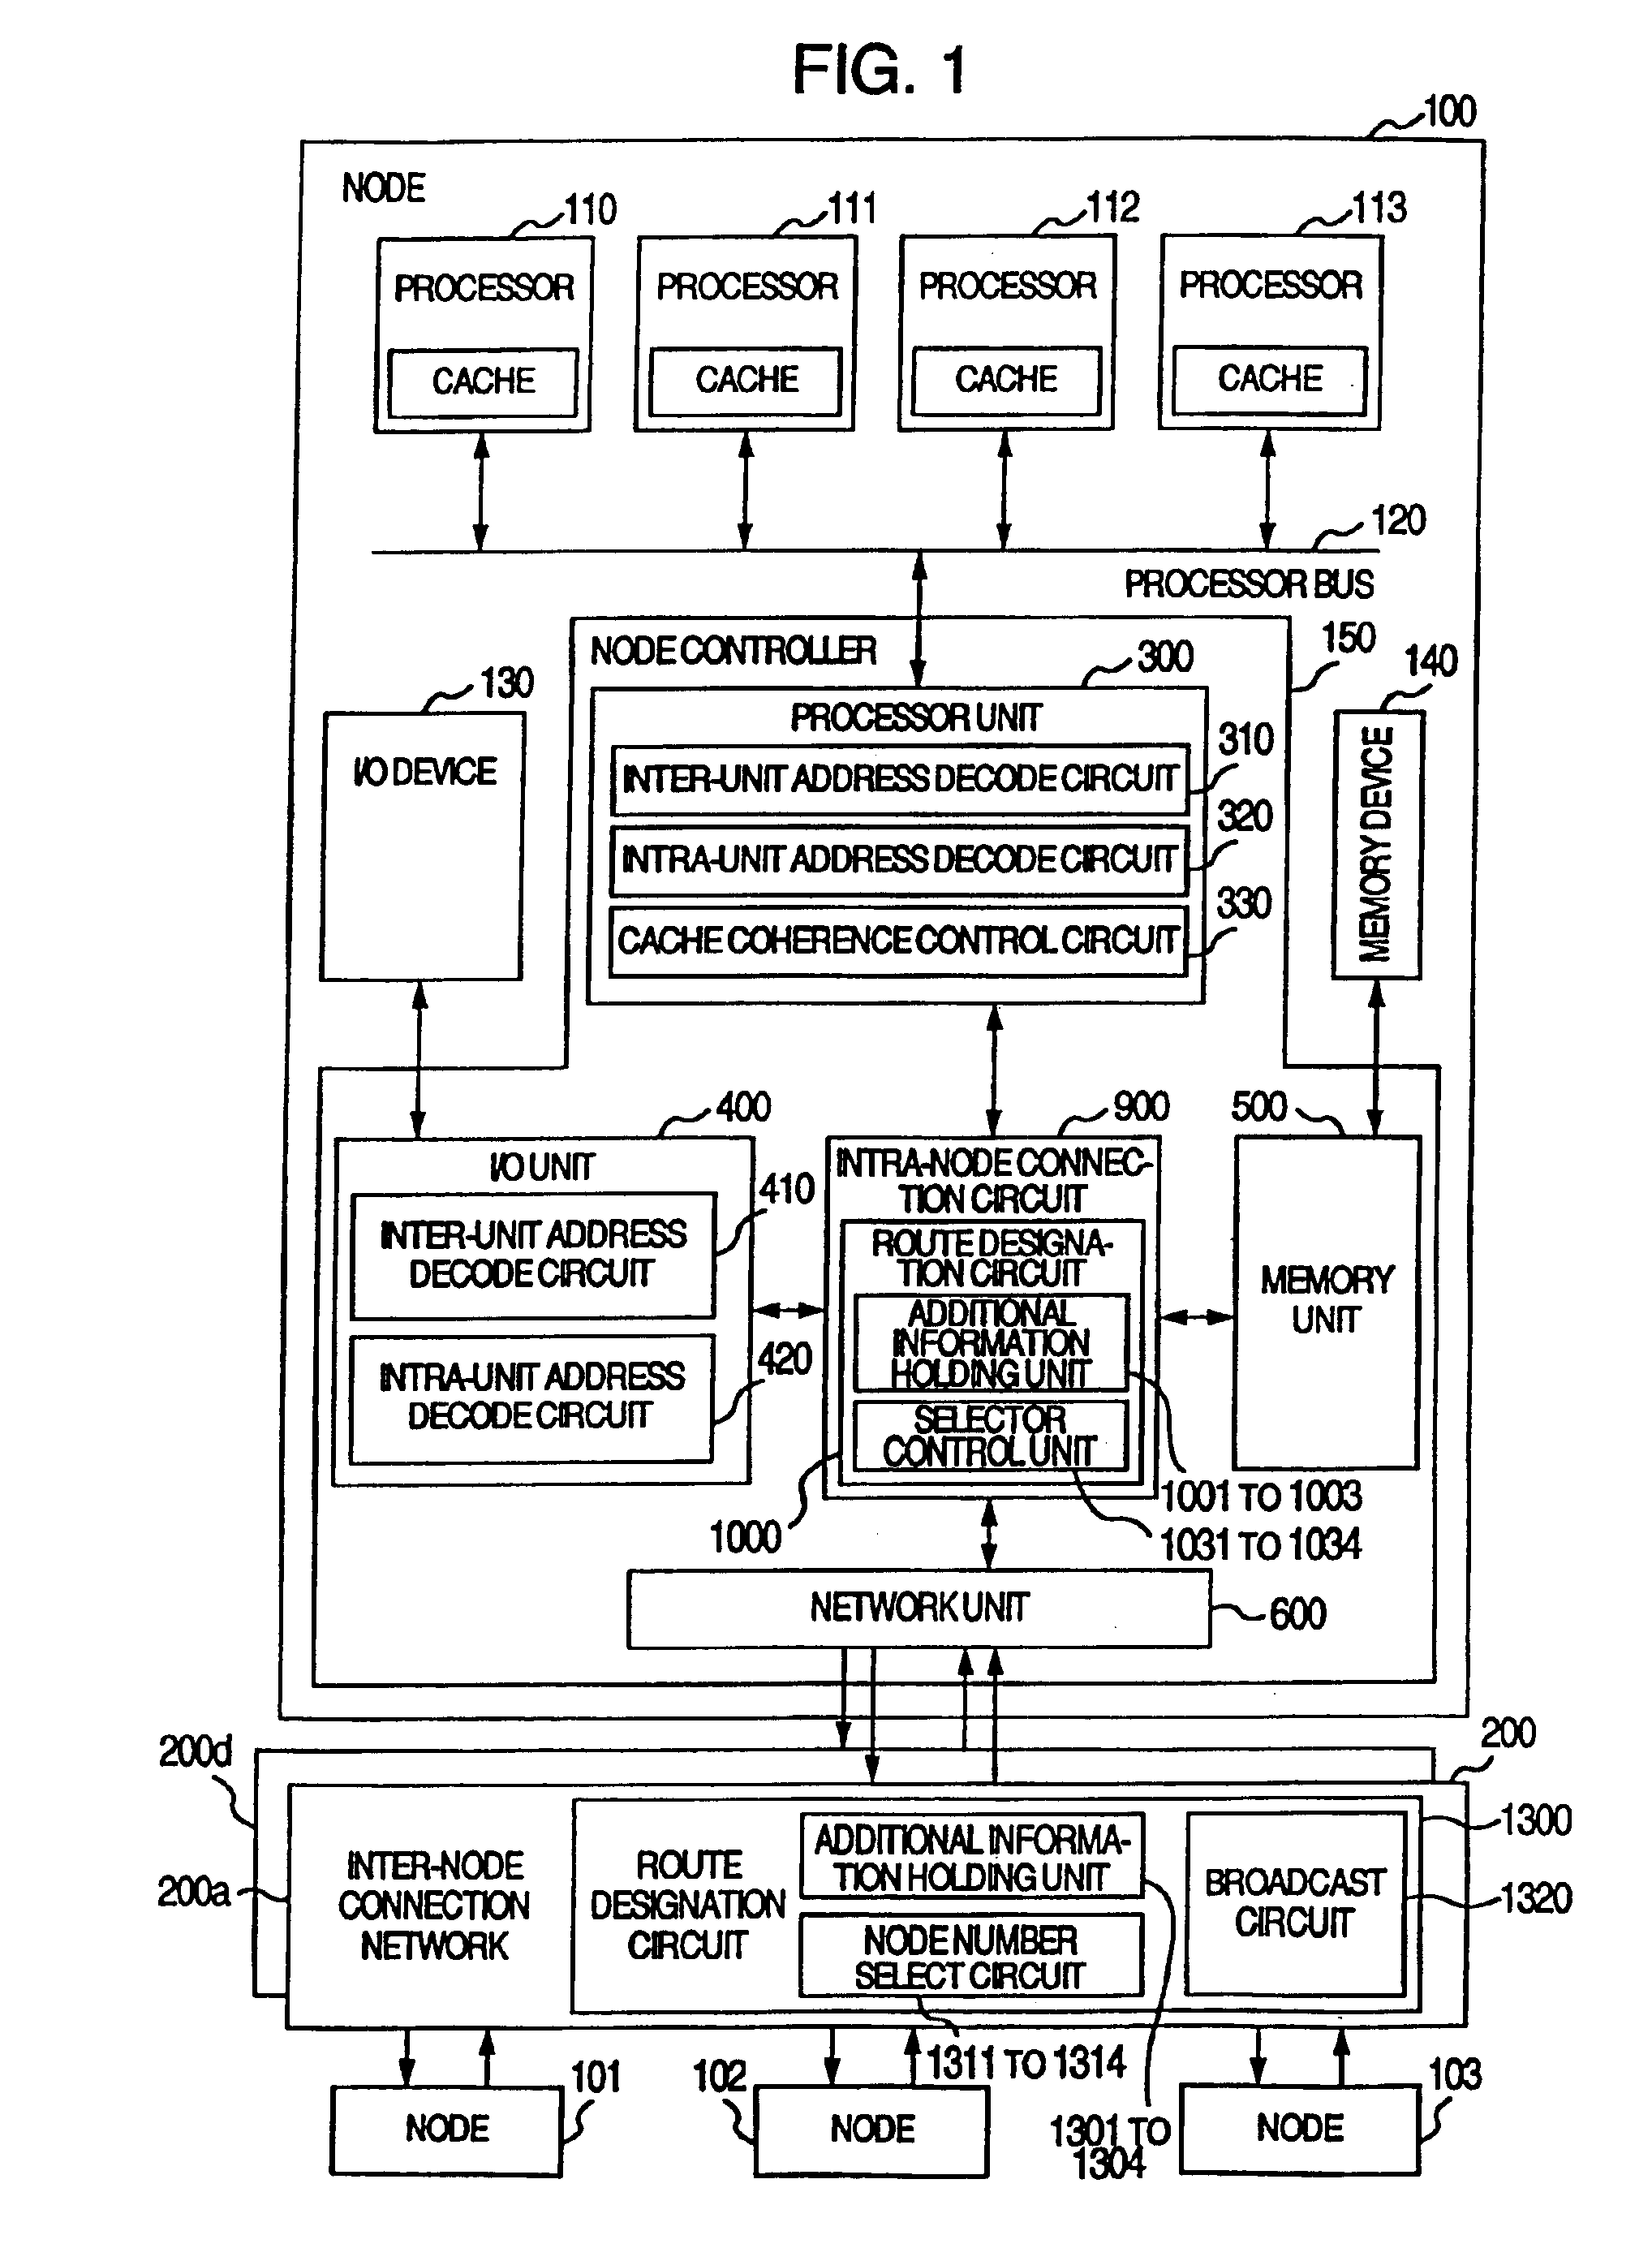 Shared memory multiprocessor performing cache coherence control and node controller therefor